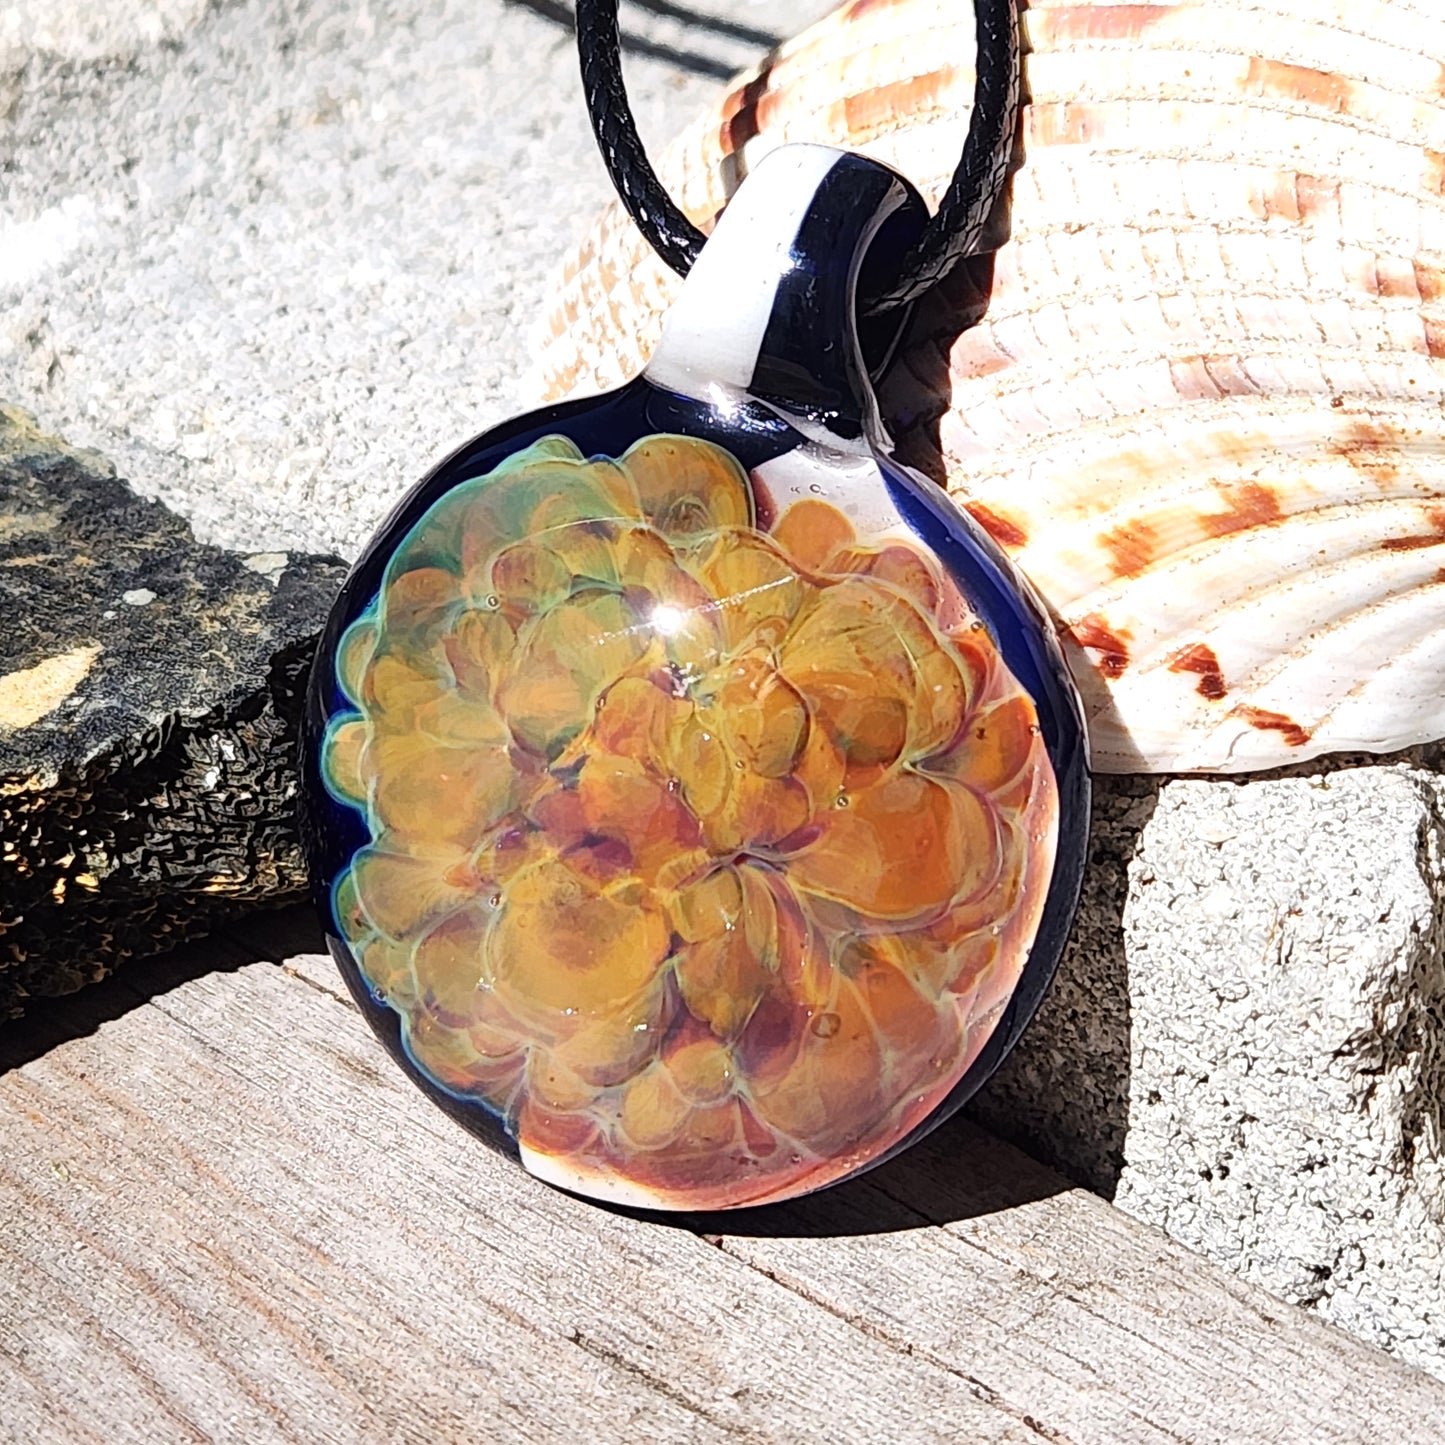 Hand Blown Glass Pendant Necklace. Splash of yellow and Purple